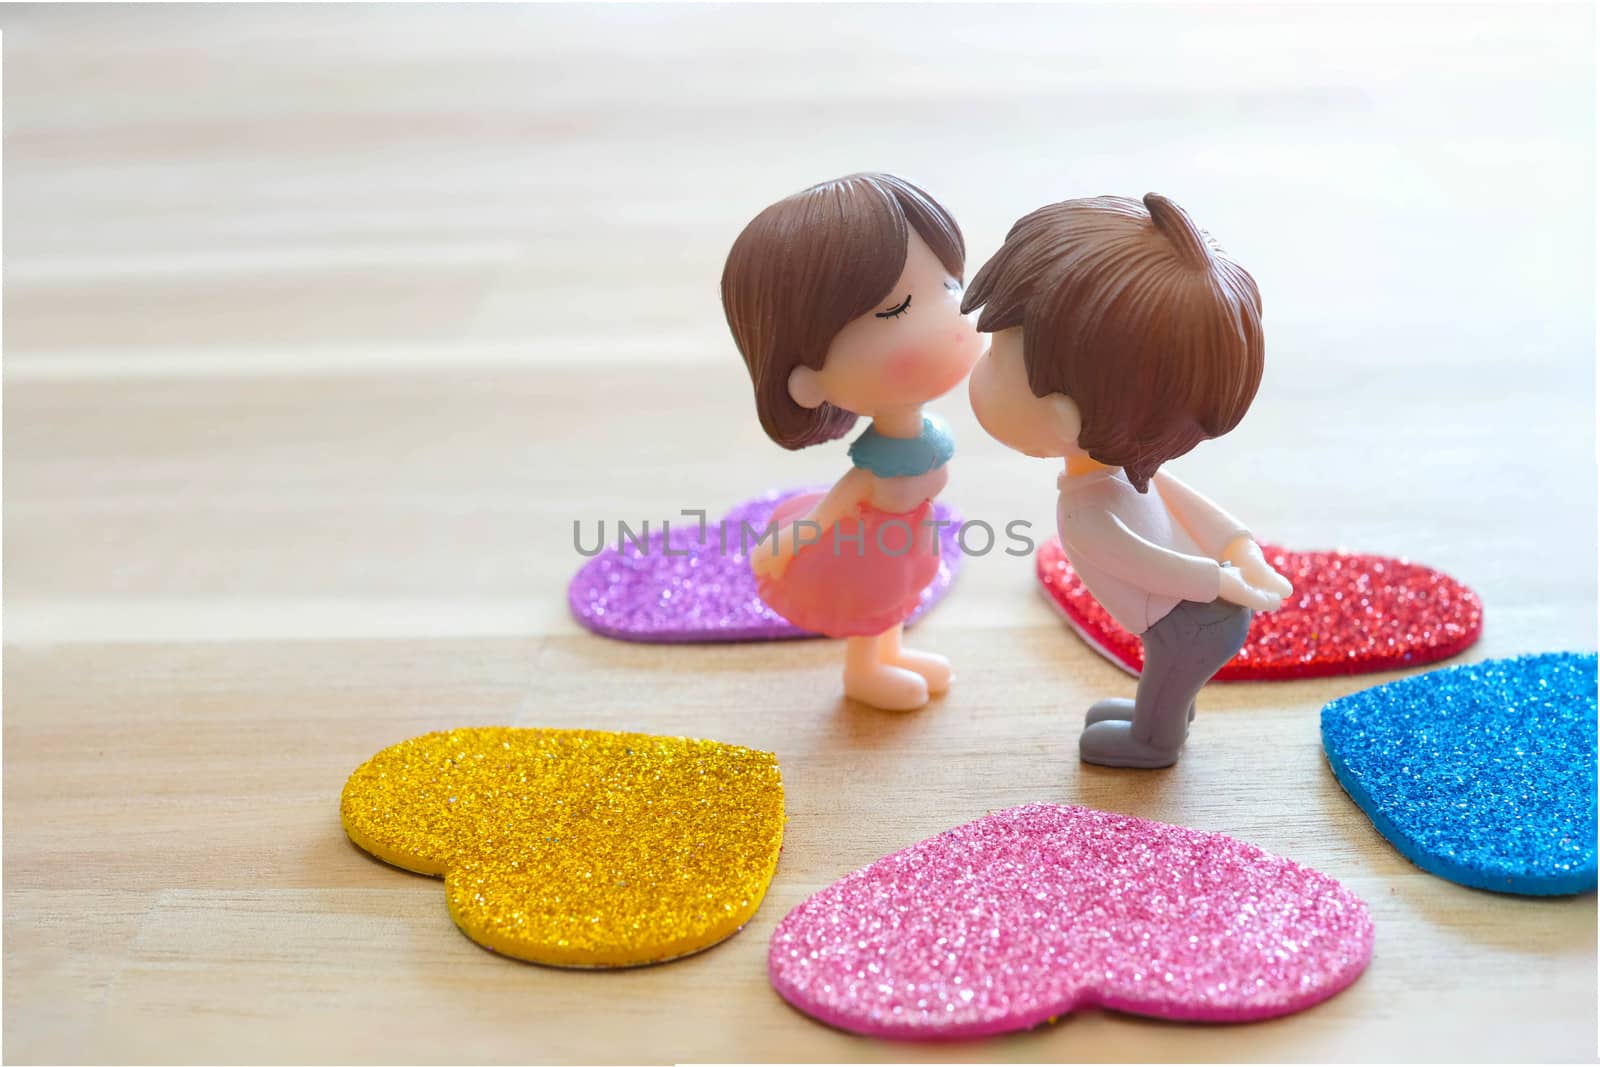 The Miniature Couple dolls Boy and Girl Romantic Kiss with Heart around the Ground  for Background for valentine's Day Concept